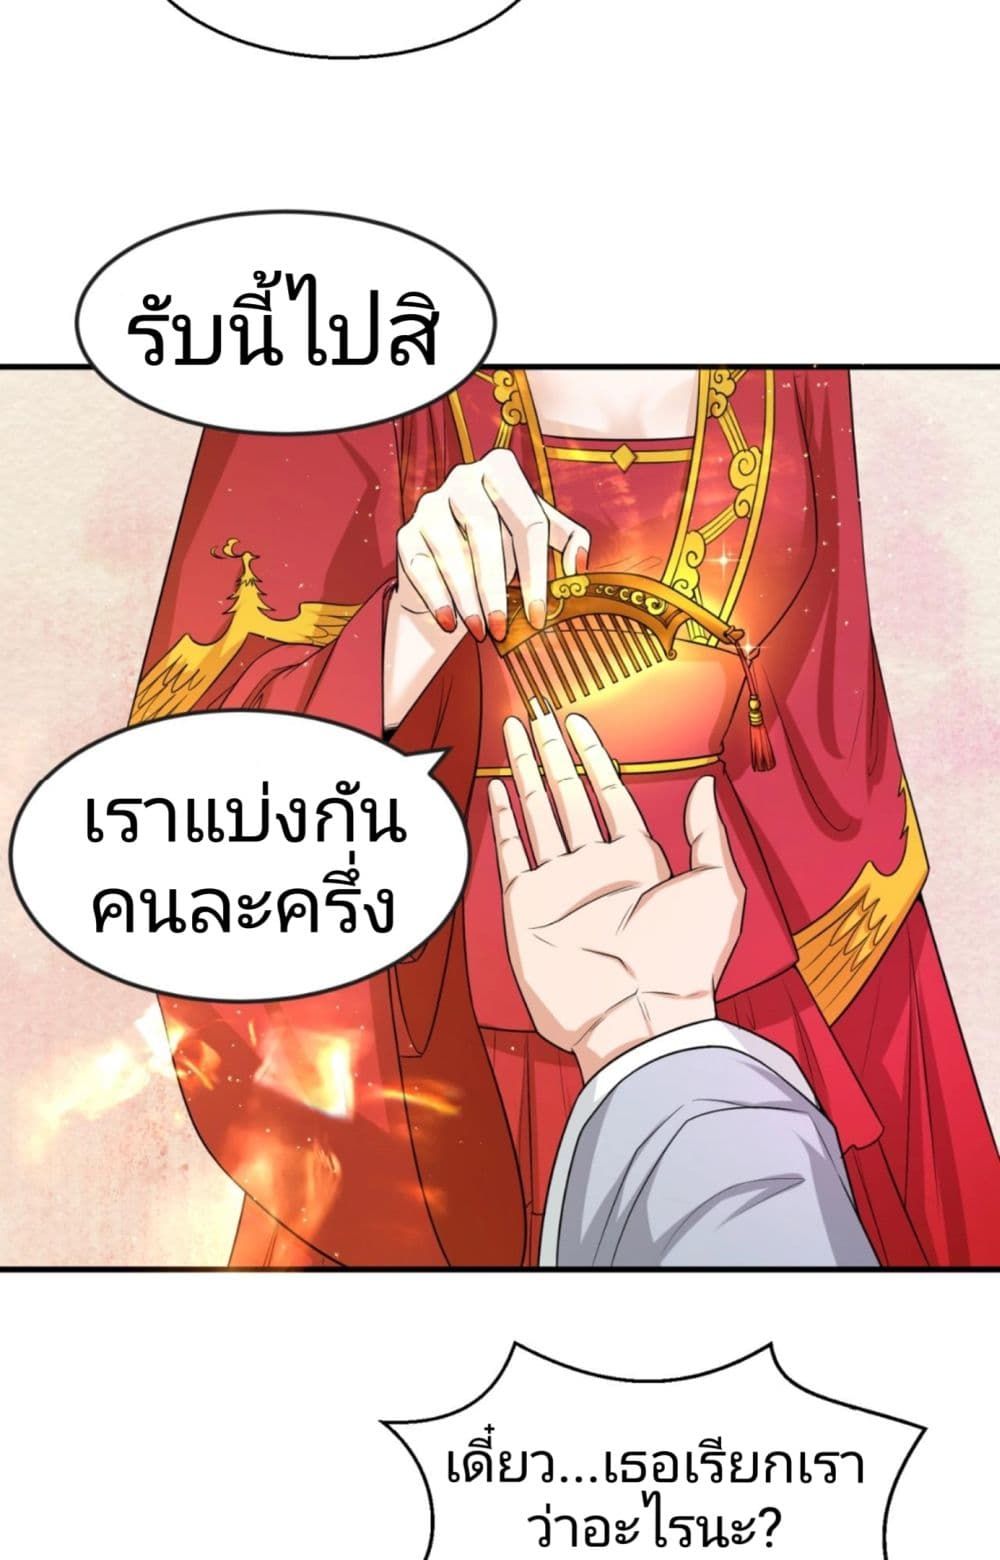 The Age of Ghost Spirits à¸à¸­à¸à¸à¸µà¹ 14 (26)